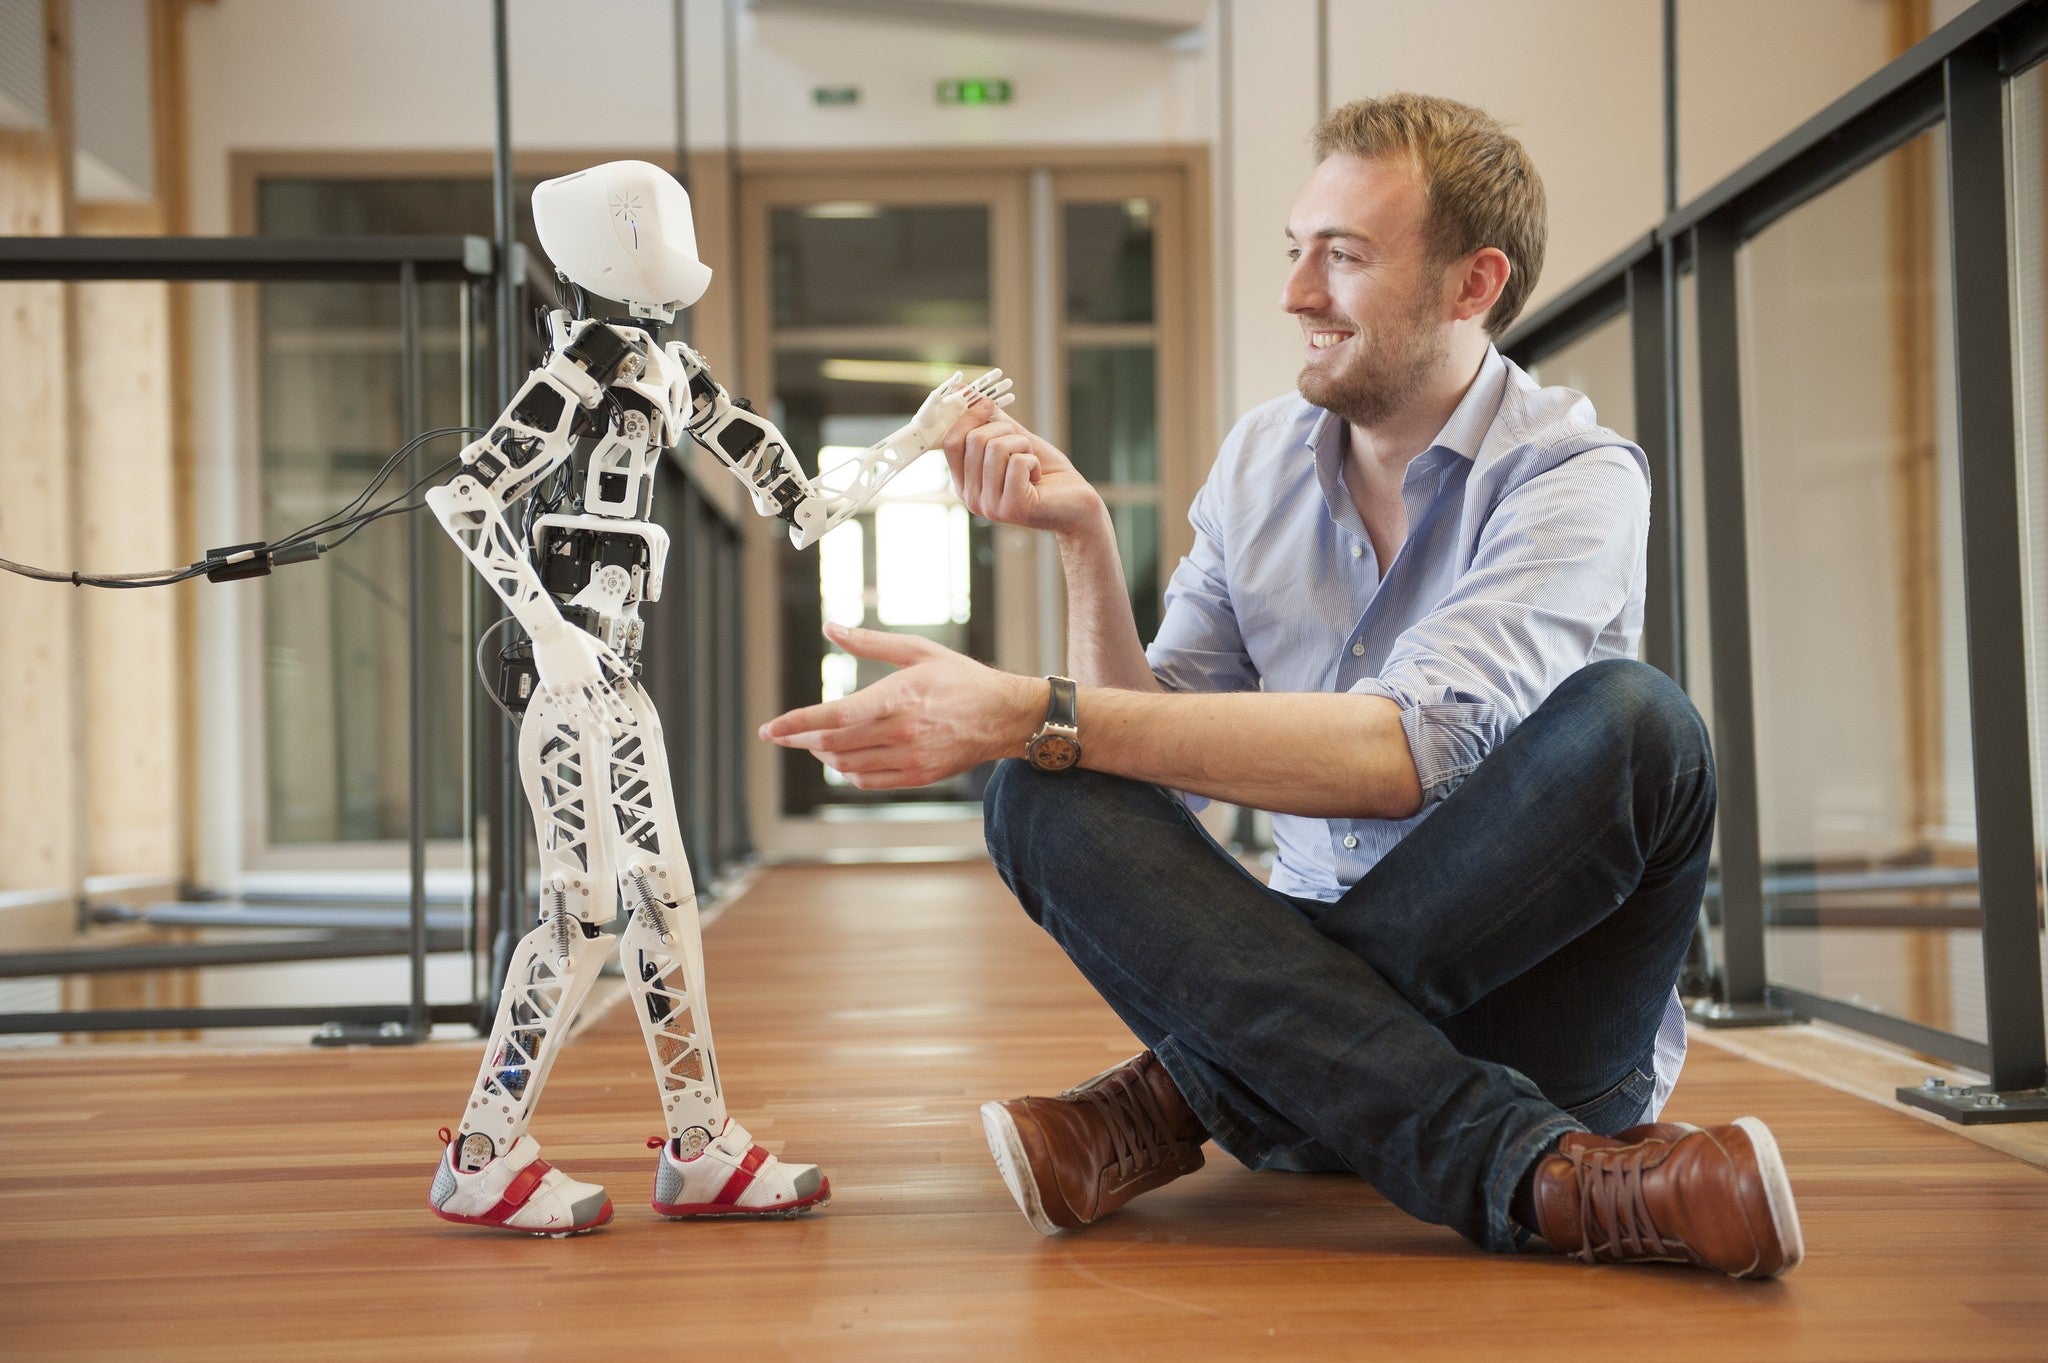 3D Printed Robotics: Creating Personalised Robots for Everyday Use